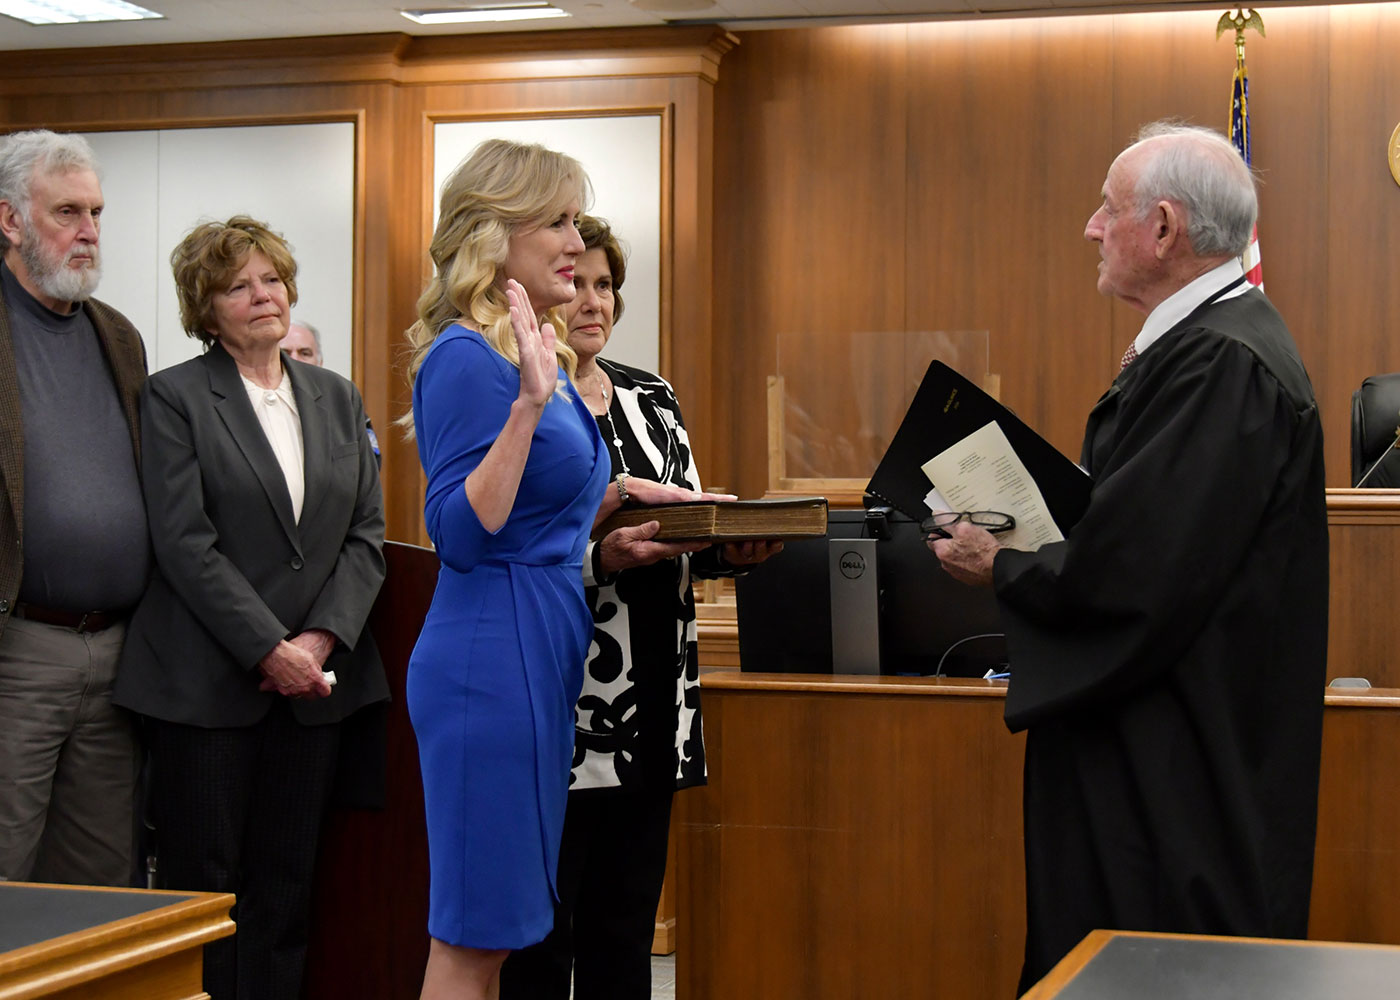 The Honorable Donald M. Fendelson swearing in Tara Zeller as District Judge (Section B), of the 22nd Judicial District.